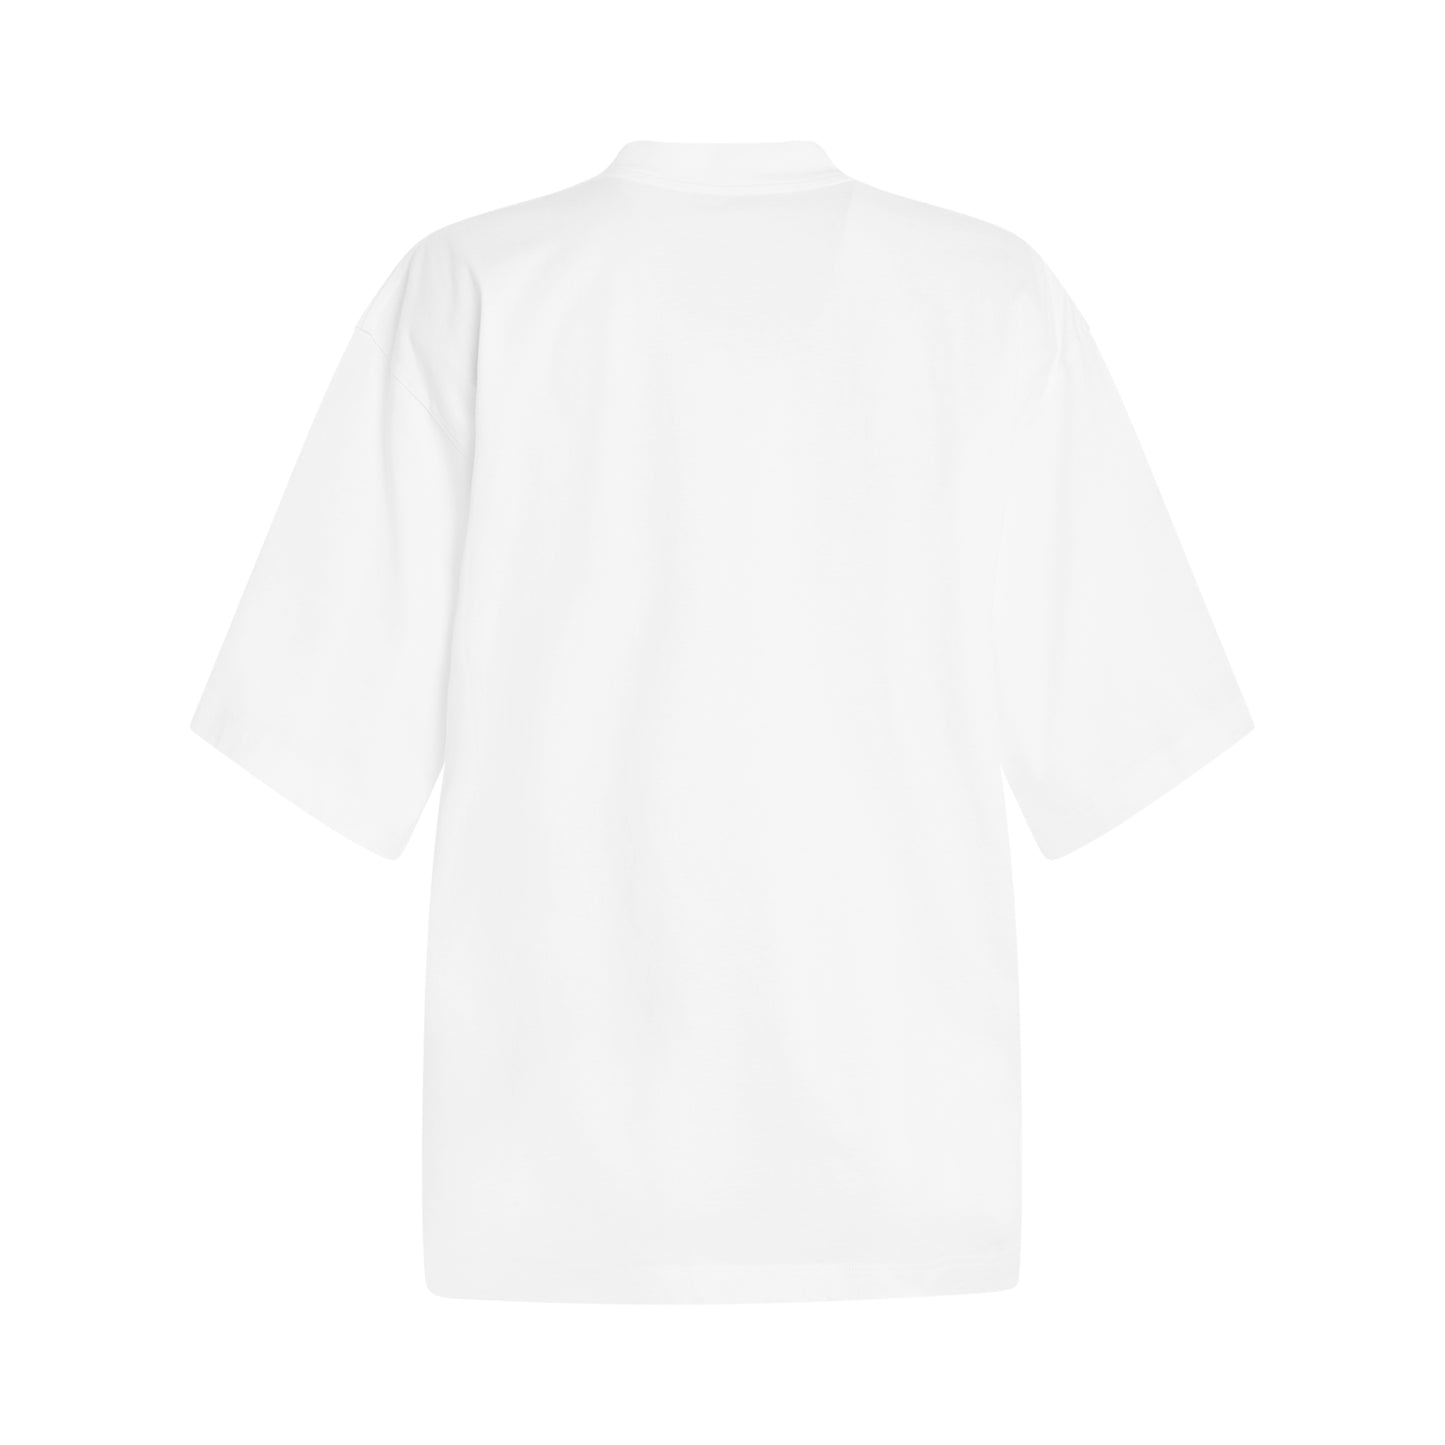 Curved Logo T-Shirt in White